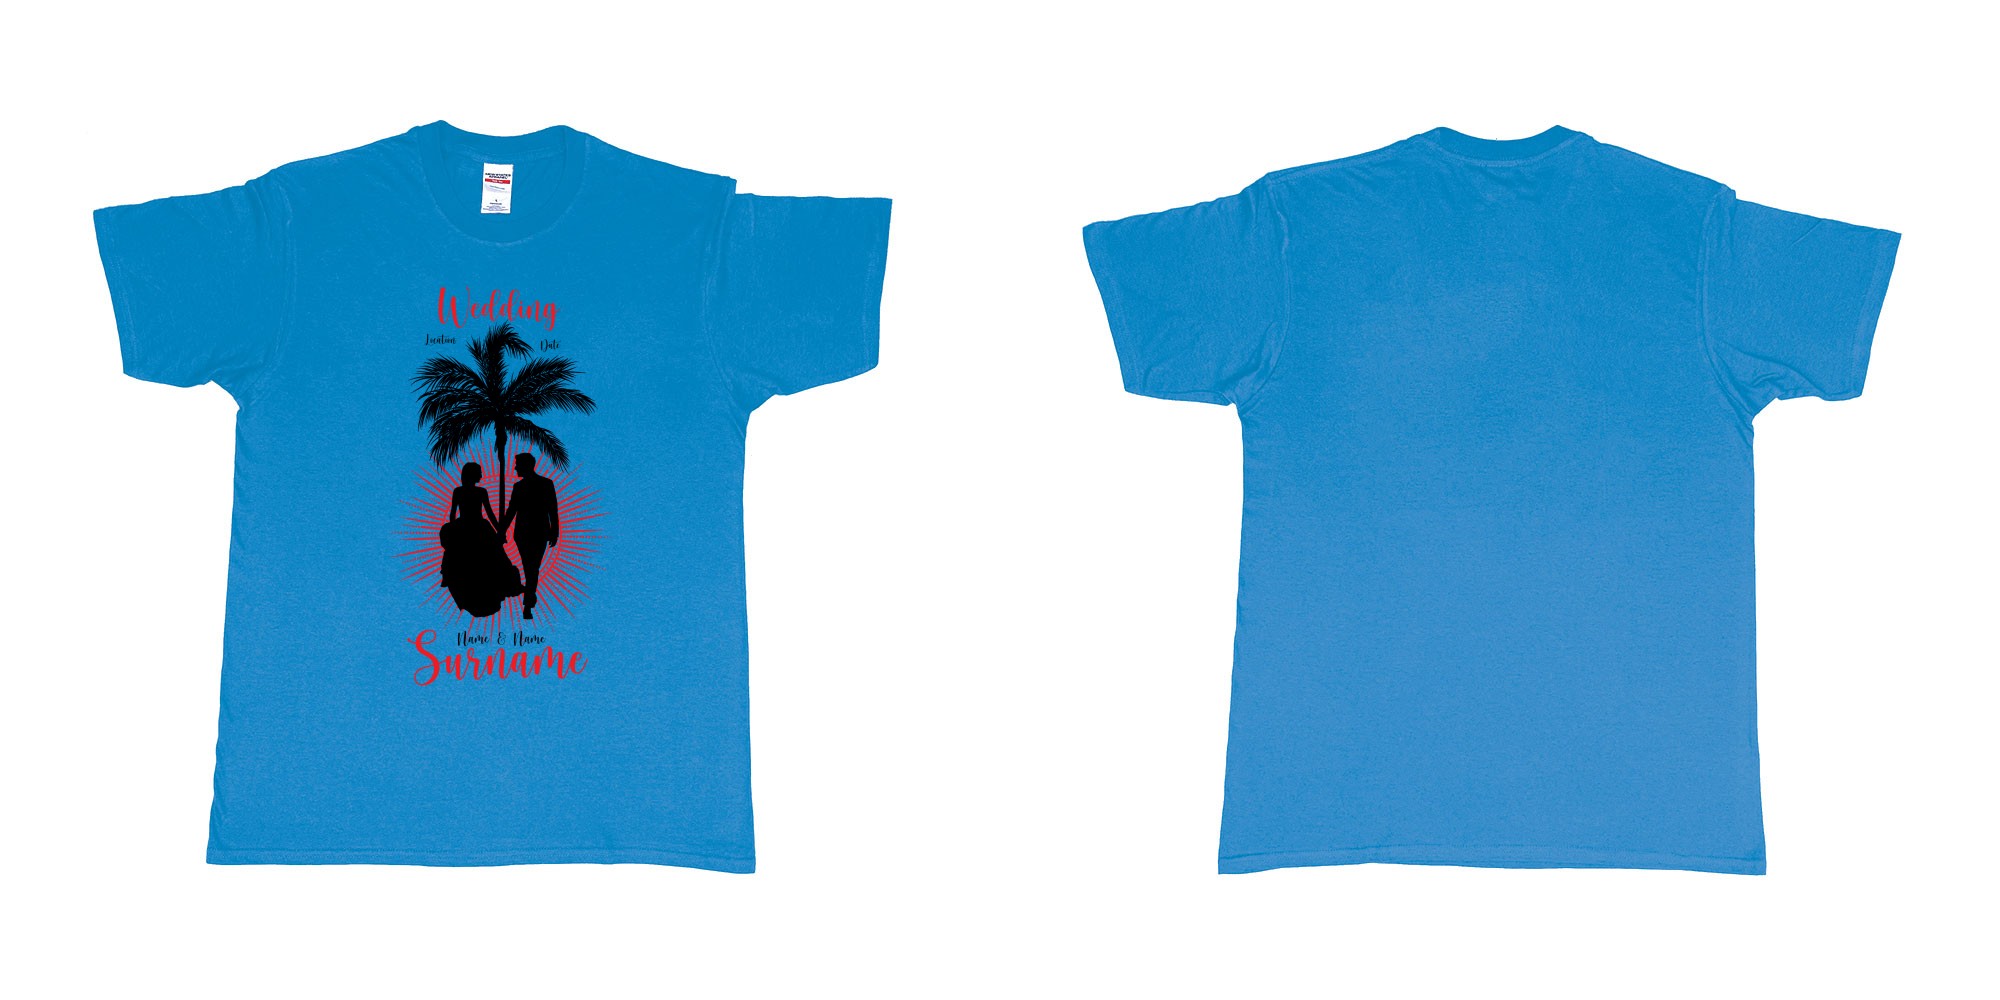 Custom tshirt design wedding palm sun bali in fabric color sapphire choice your own text made in Bali by The Pirate Way